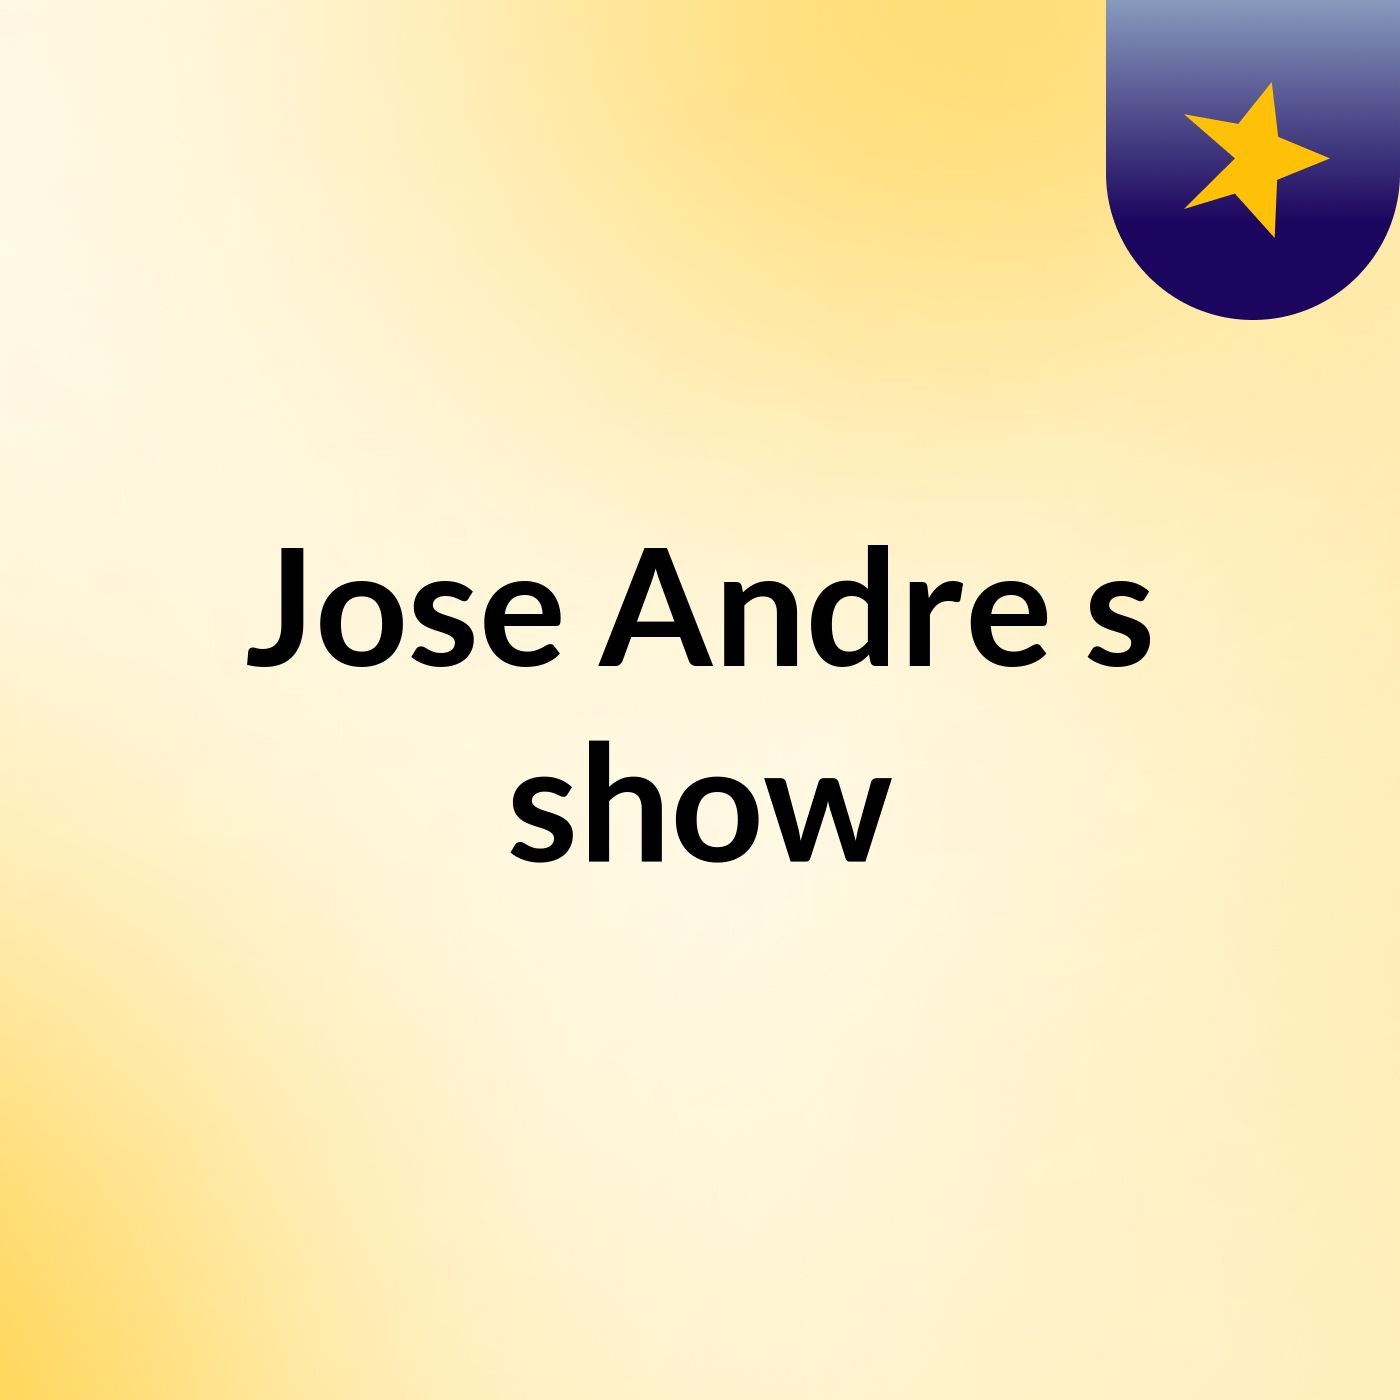 Jose Andre's show